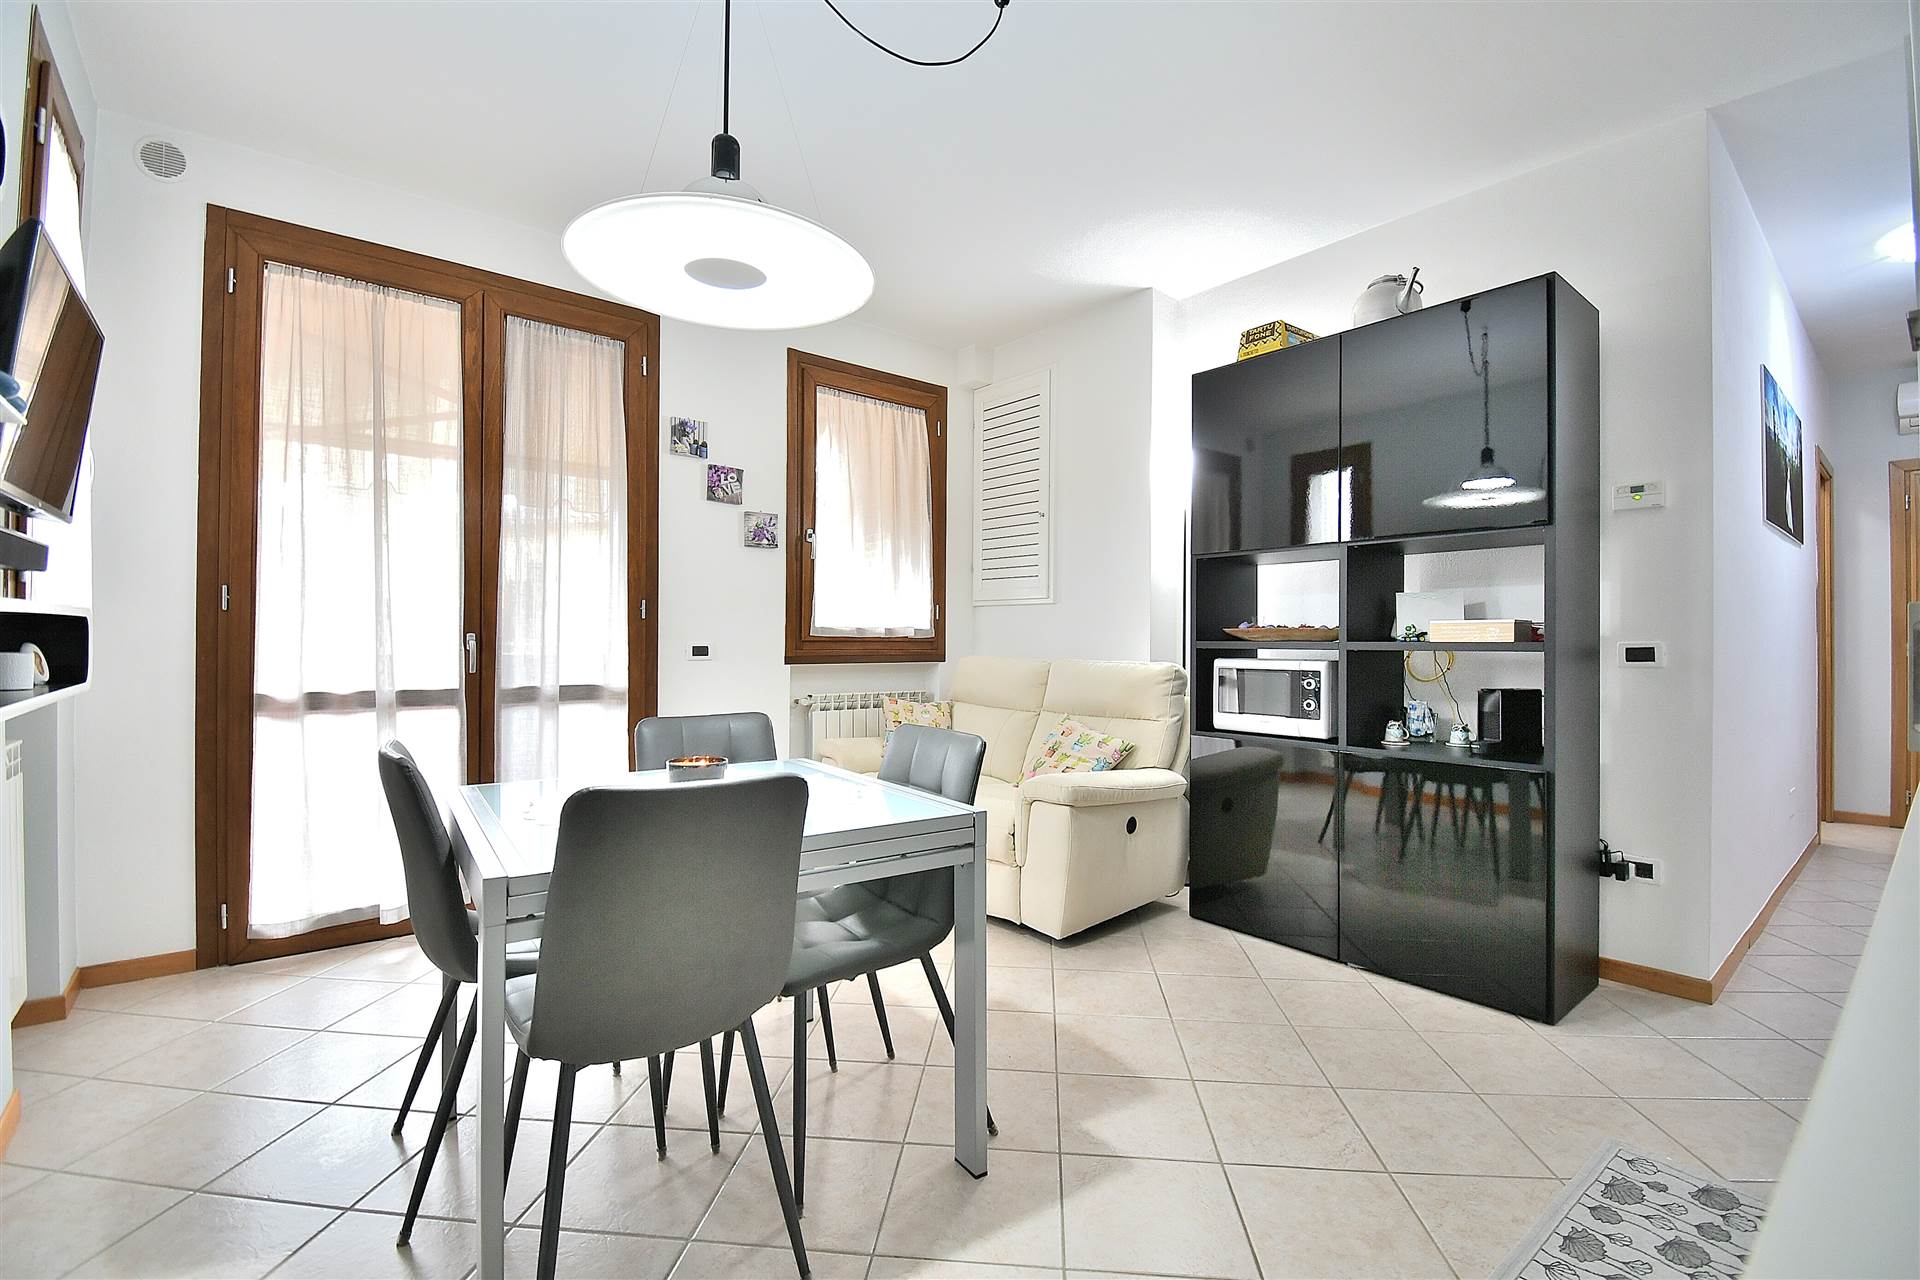 SANT'ANDREA, SIENA, Apartment for sale of 62 Sq. mt., Energetic class: G, Epi: 175 kwh/m2 year, placed at 1° on 2, composed by: 3 Rooms, 2 Bedrooms, 1 Bathroom, Double Box, Parking space, Terrace, 